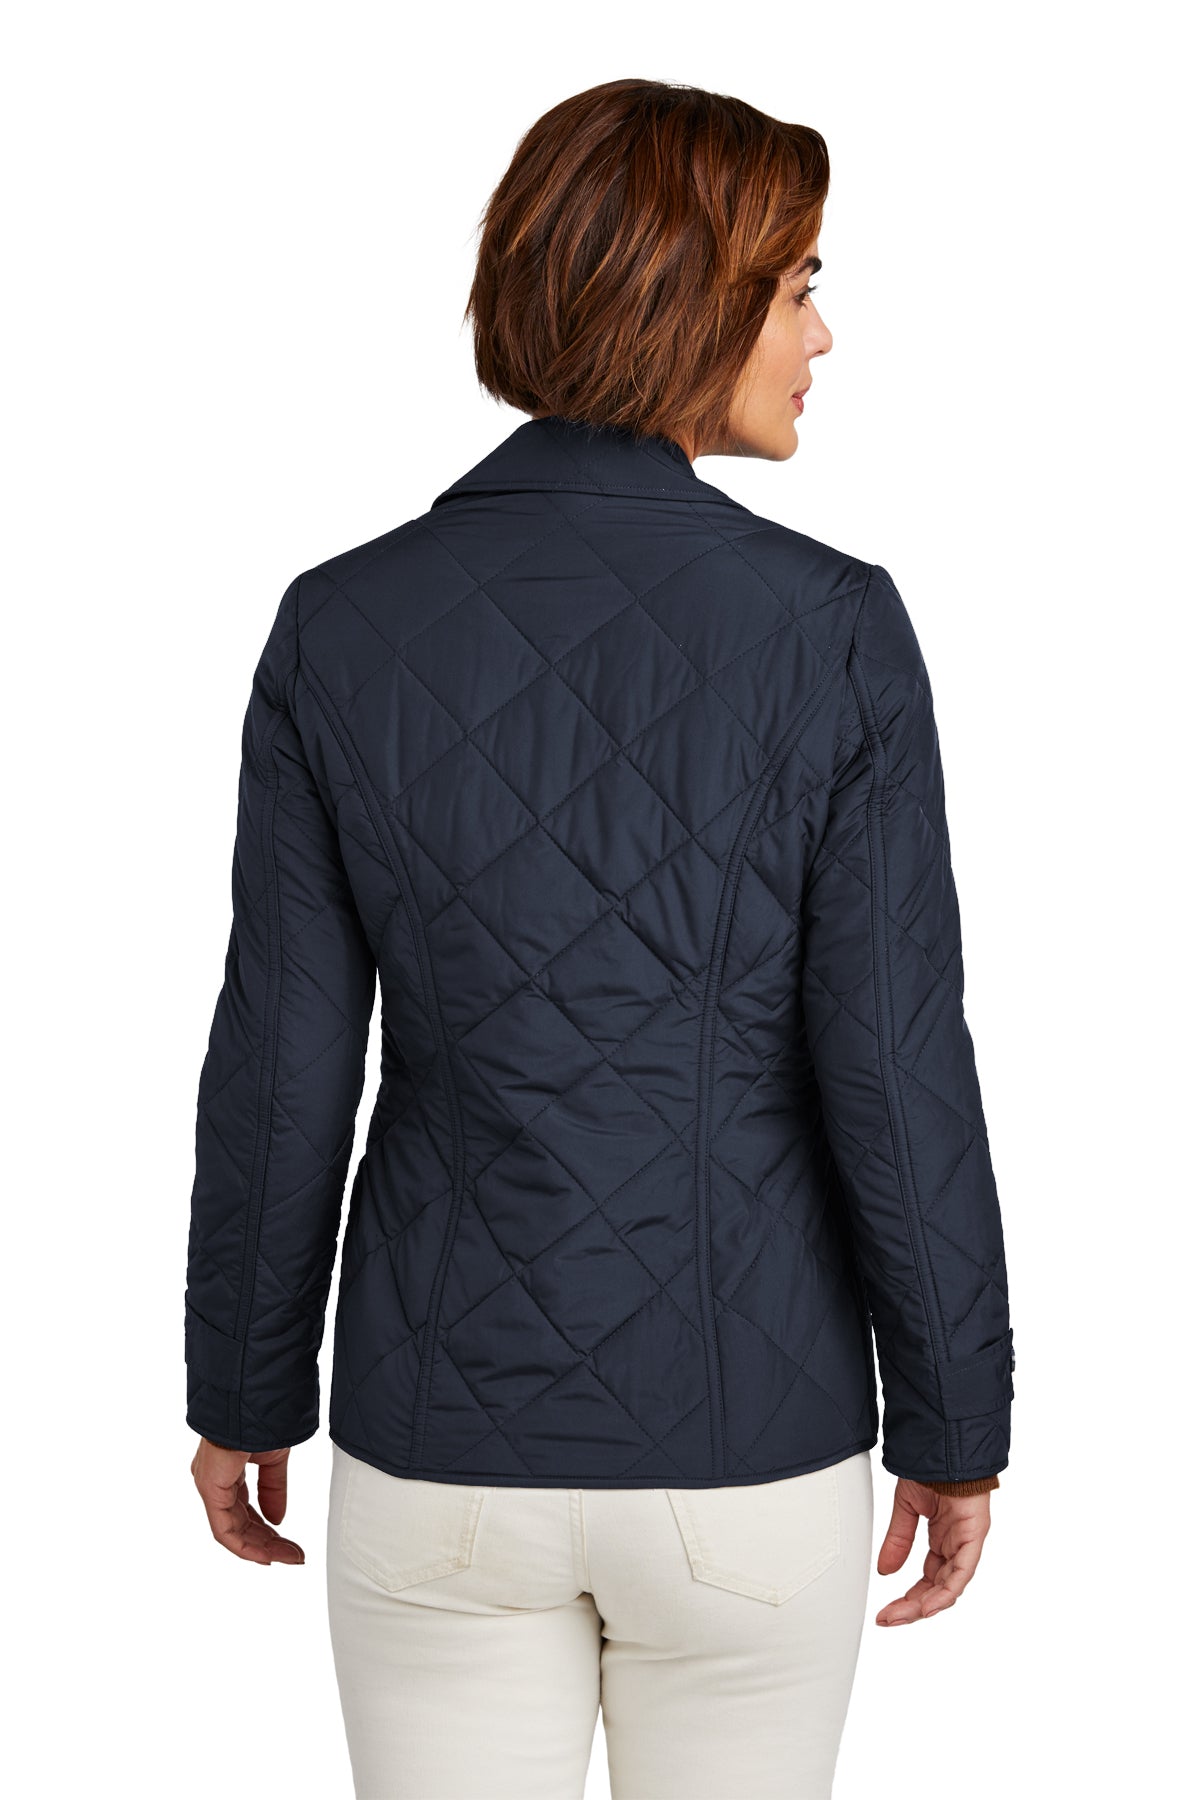 Brooks Brothers Womens Quilted Jacket, Night Navy